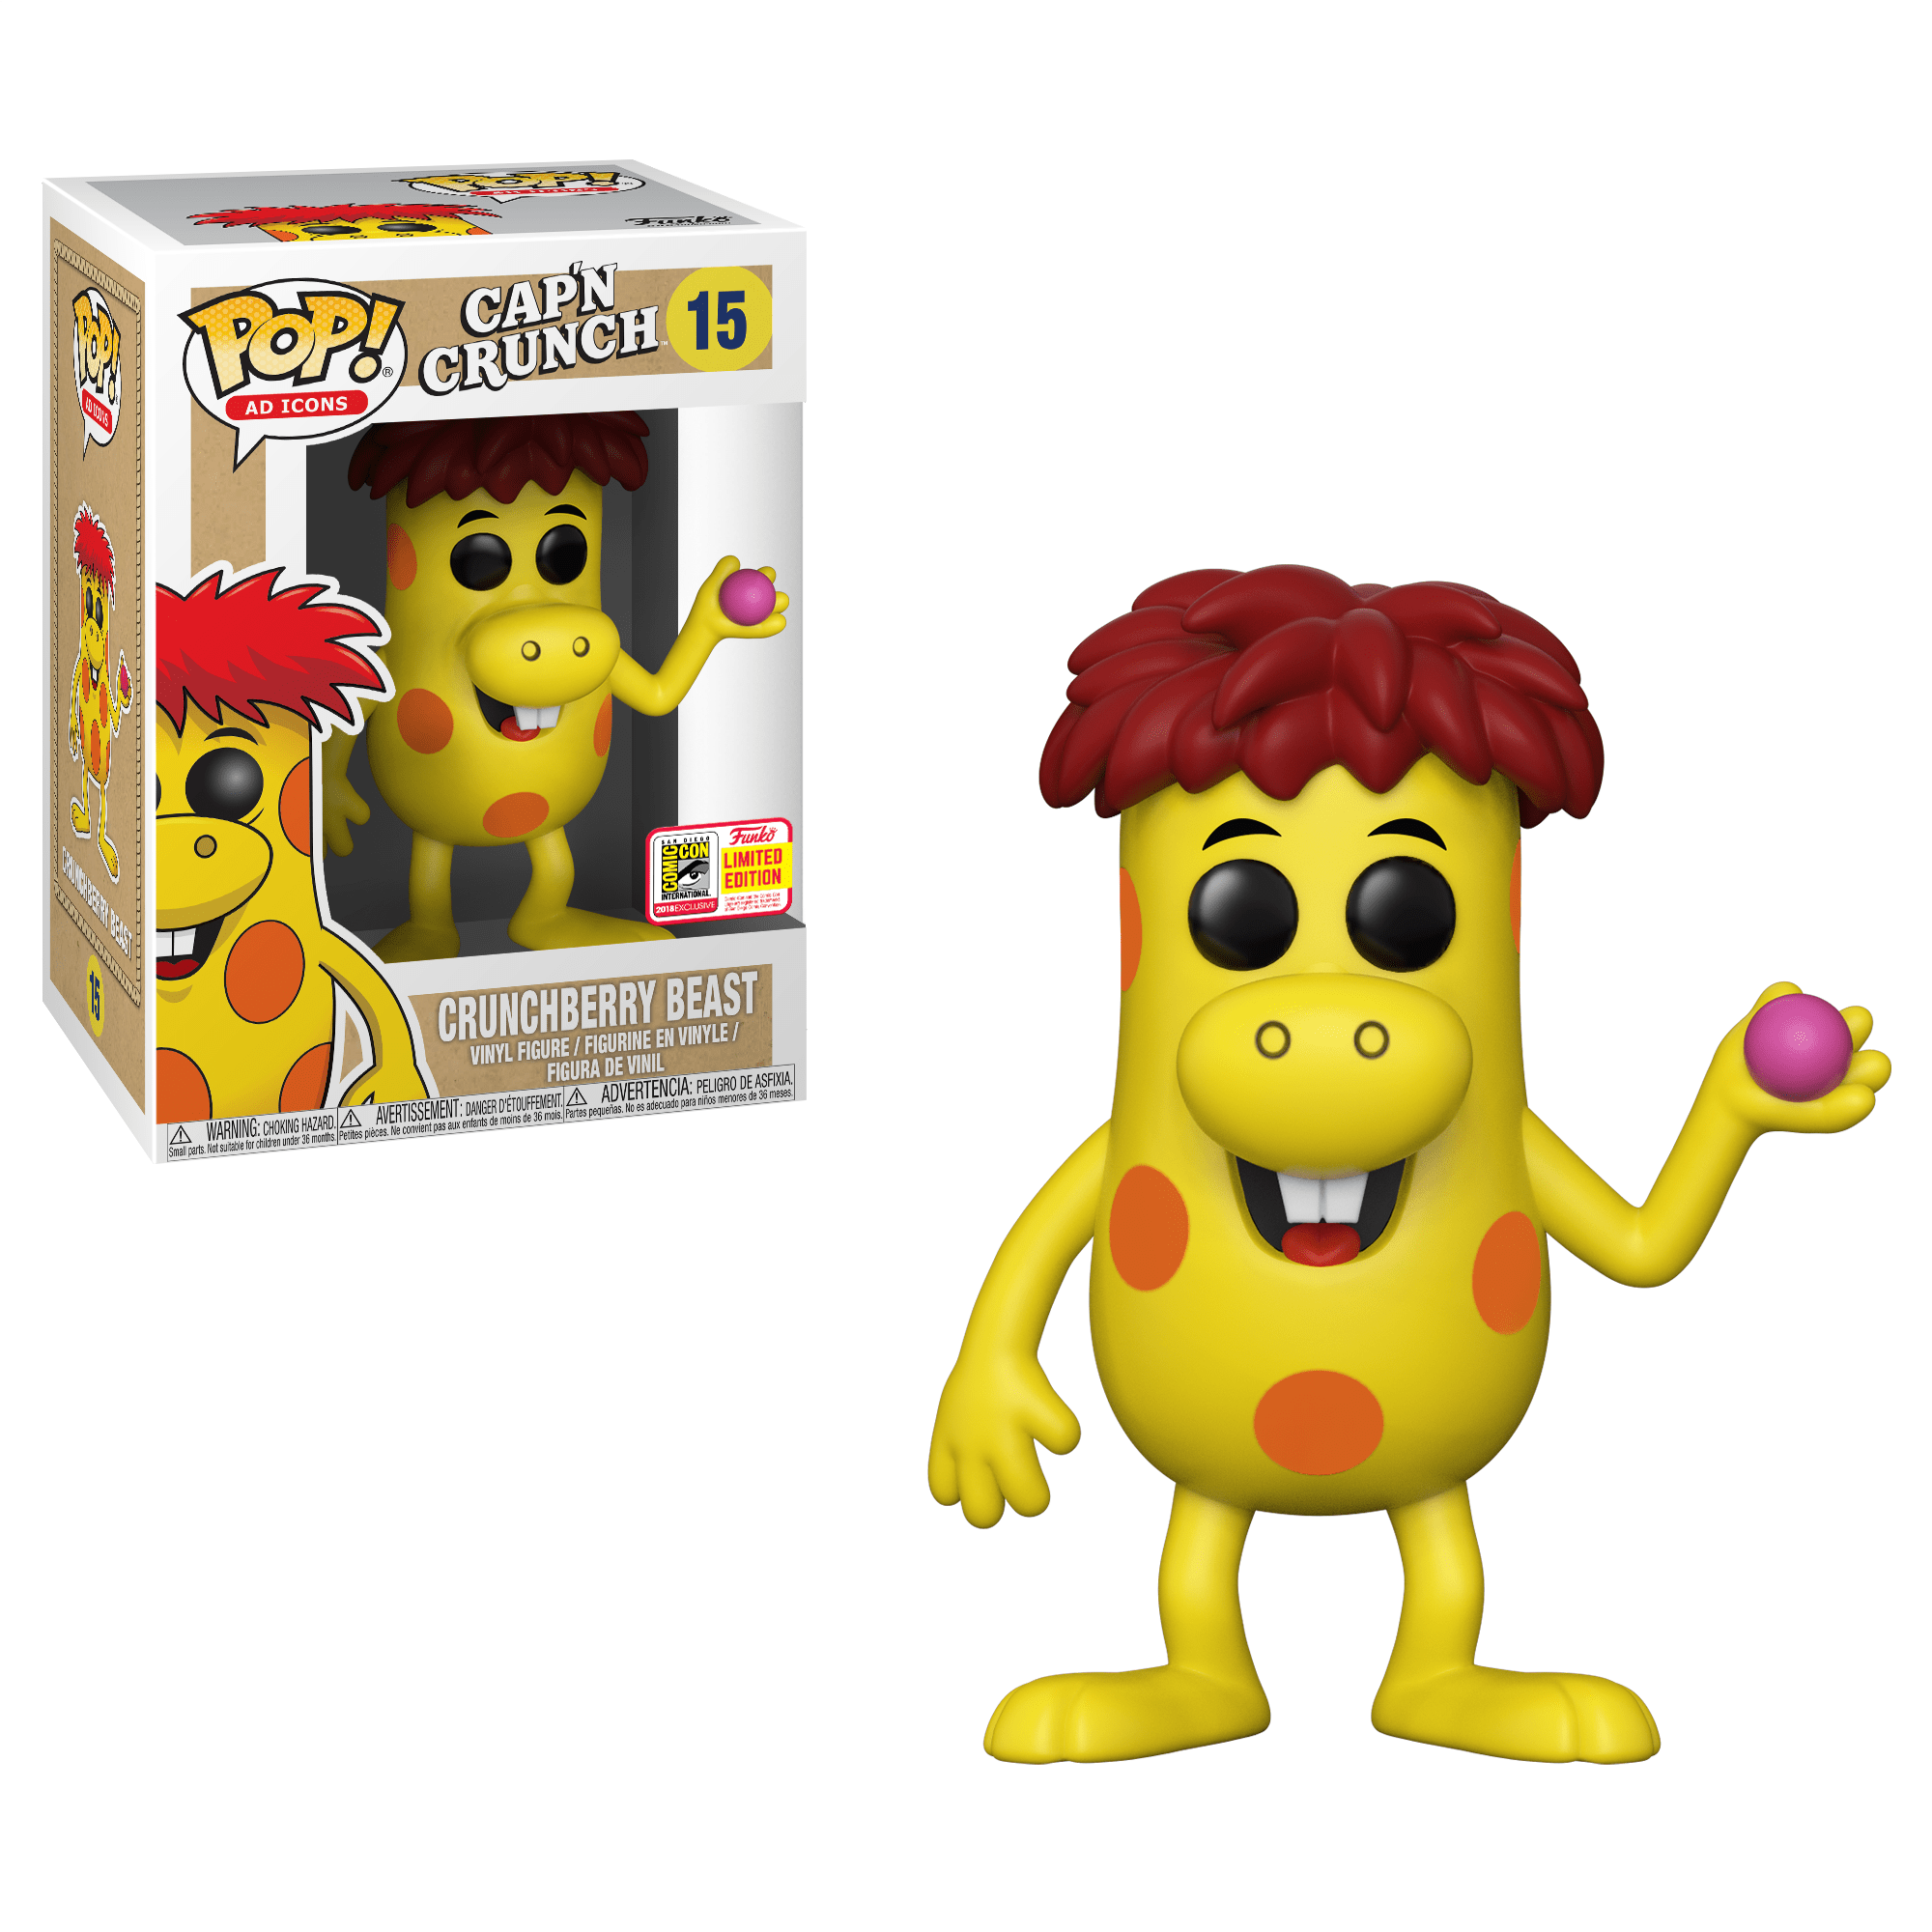 Funko Pop! Crunchberry Beast (Ad Icons)